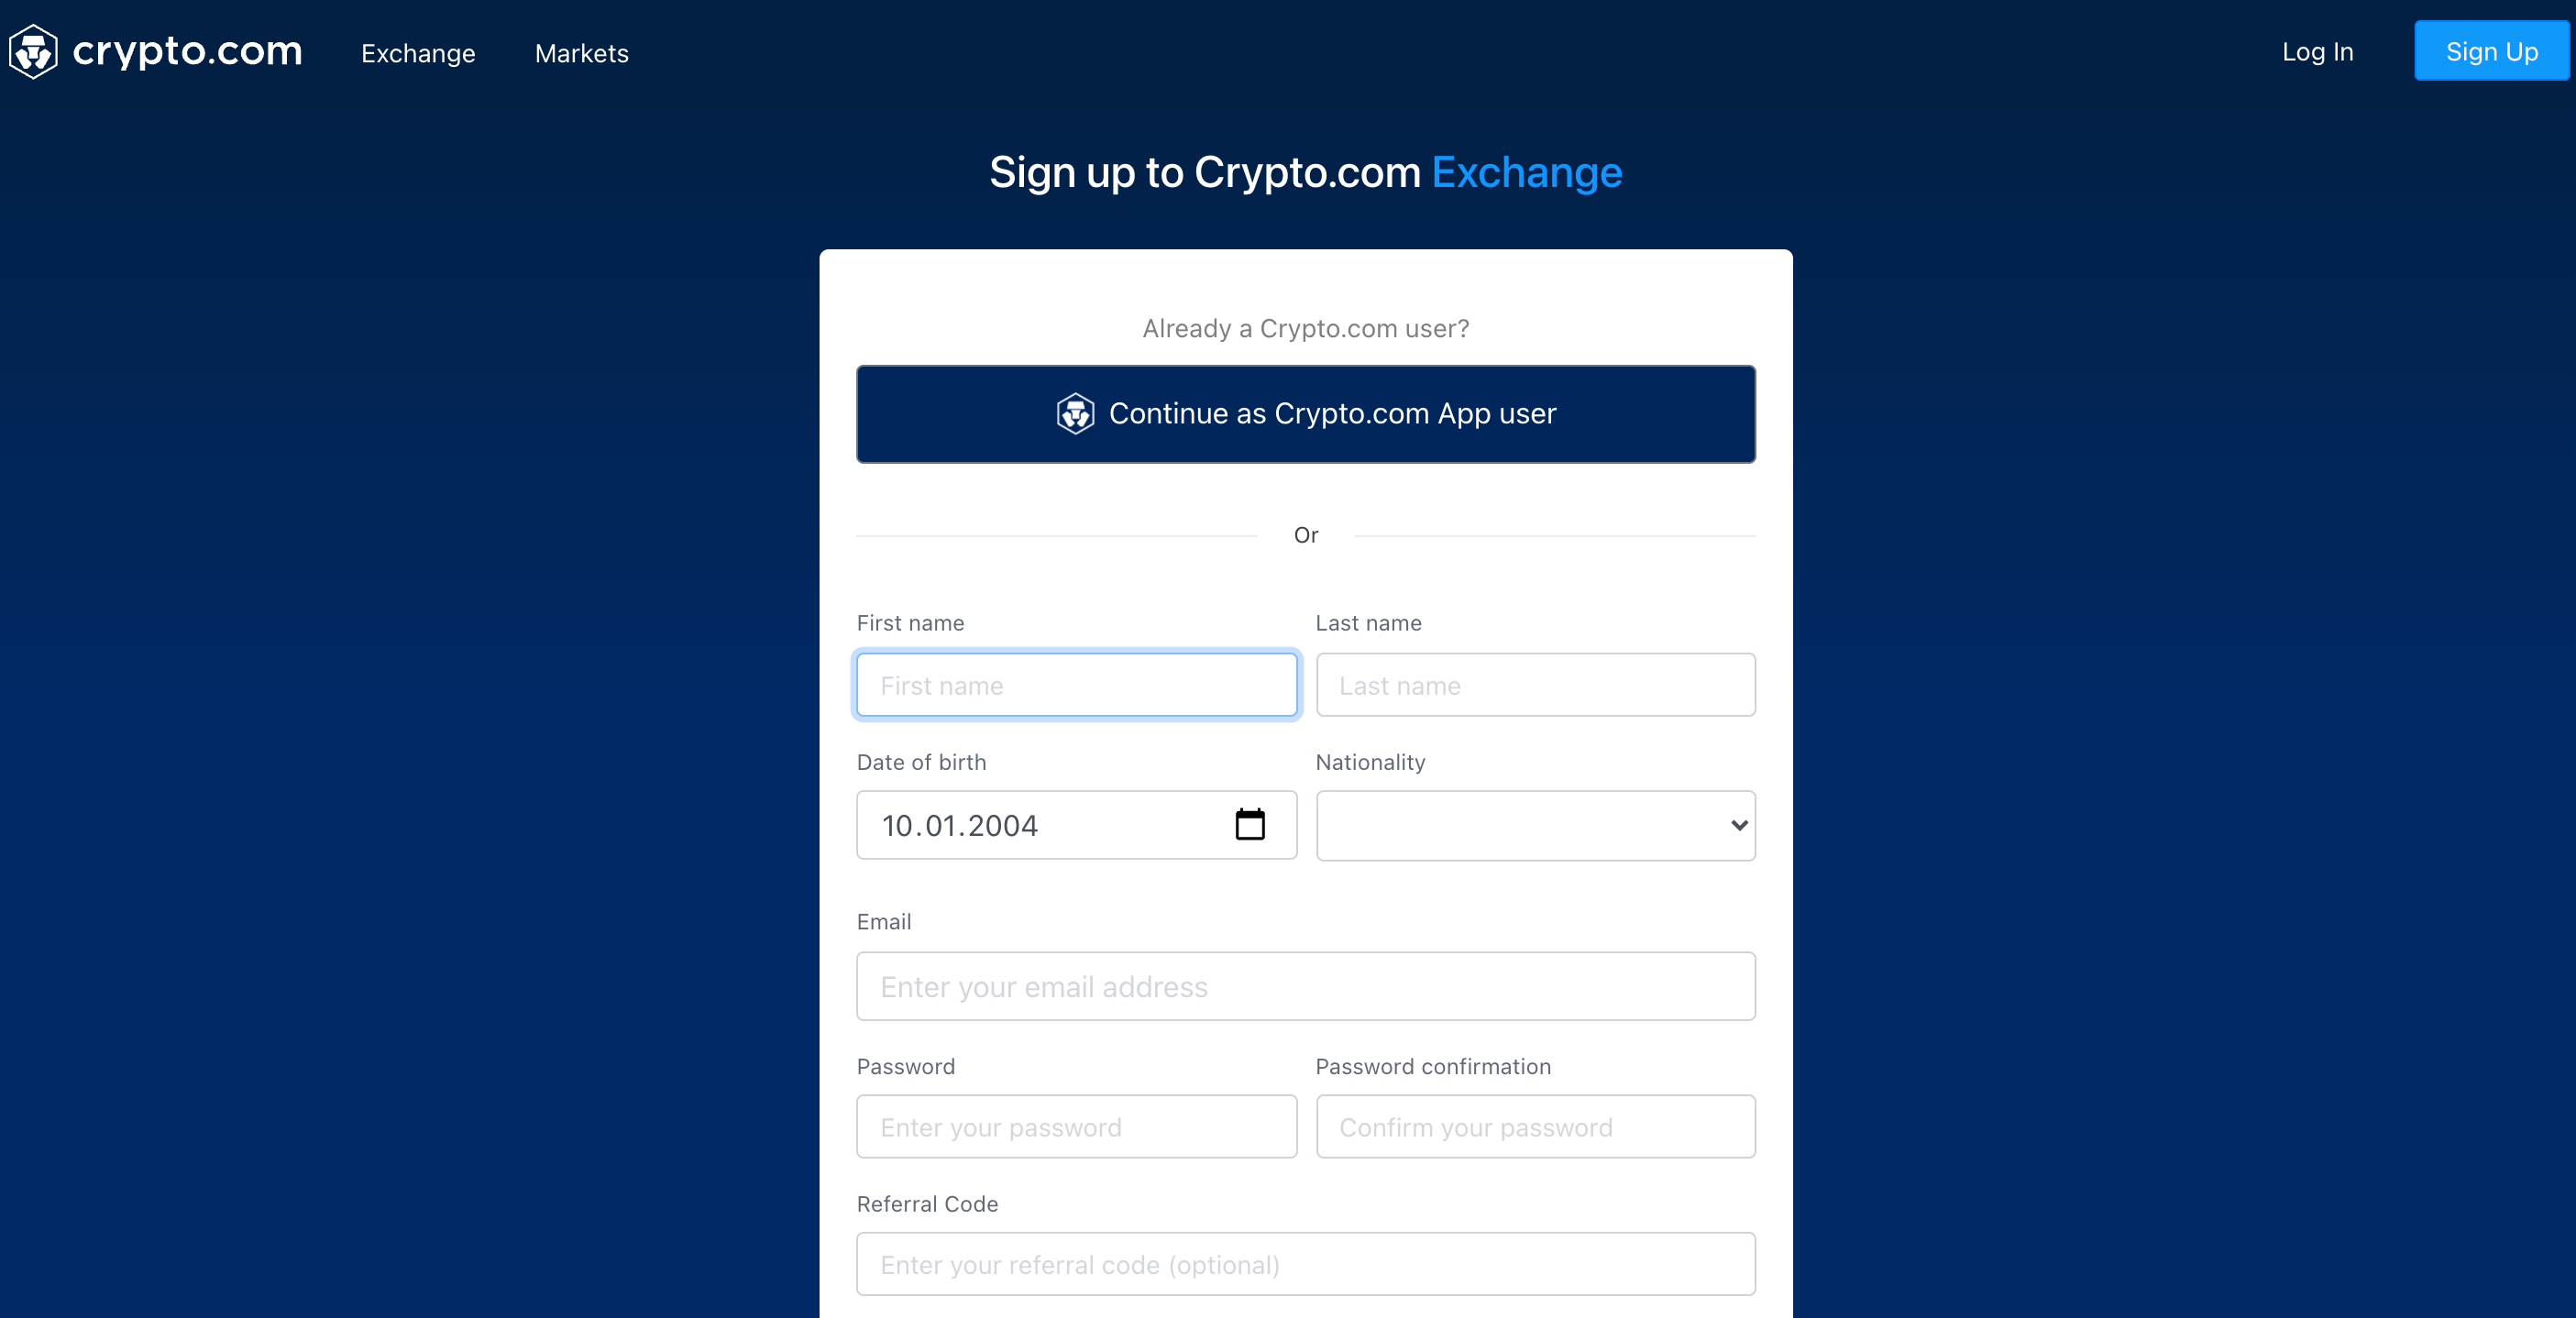 How to open an account with Crypto.com